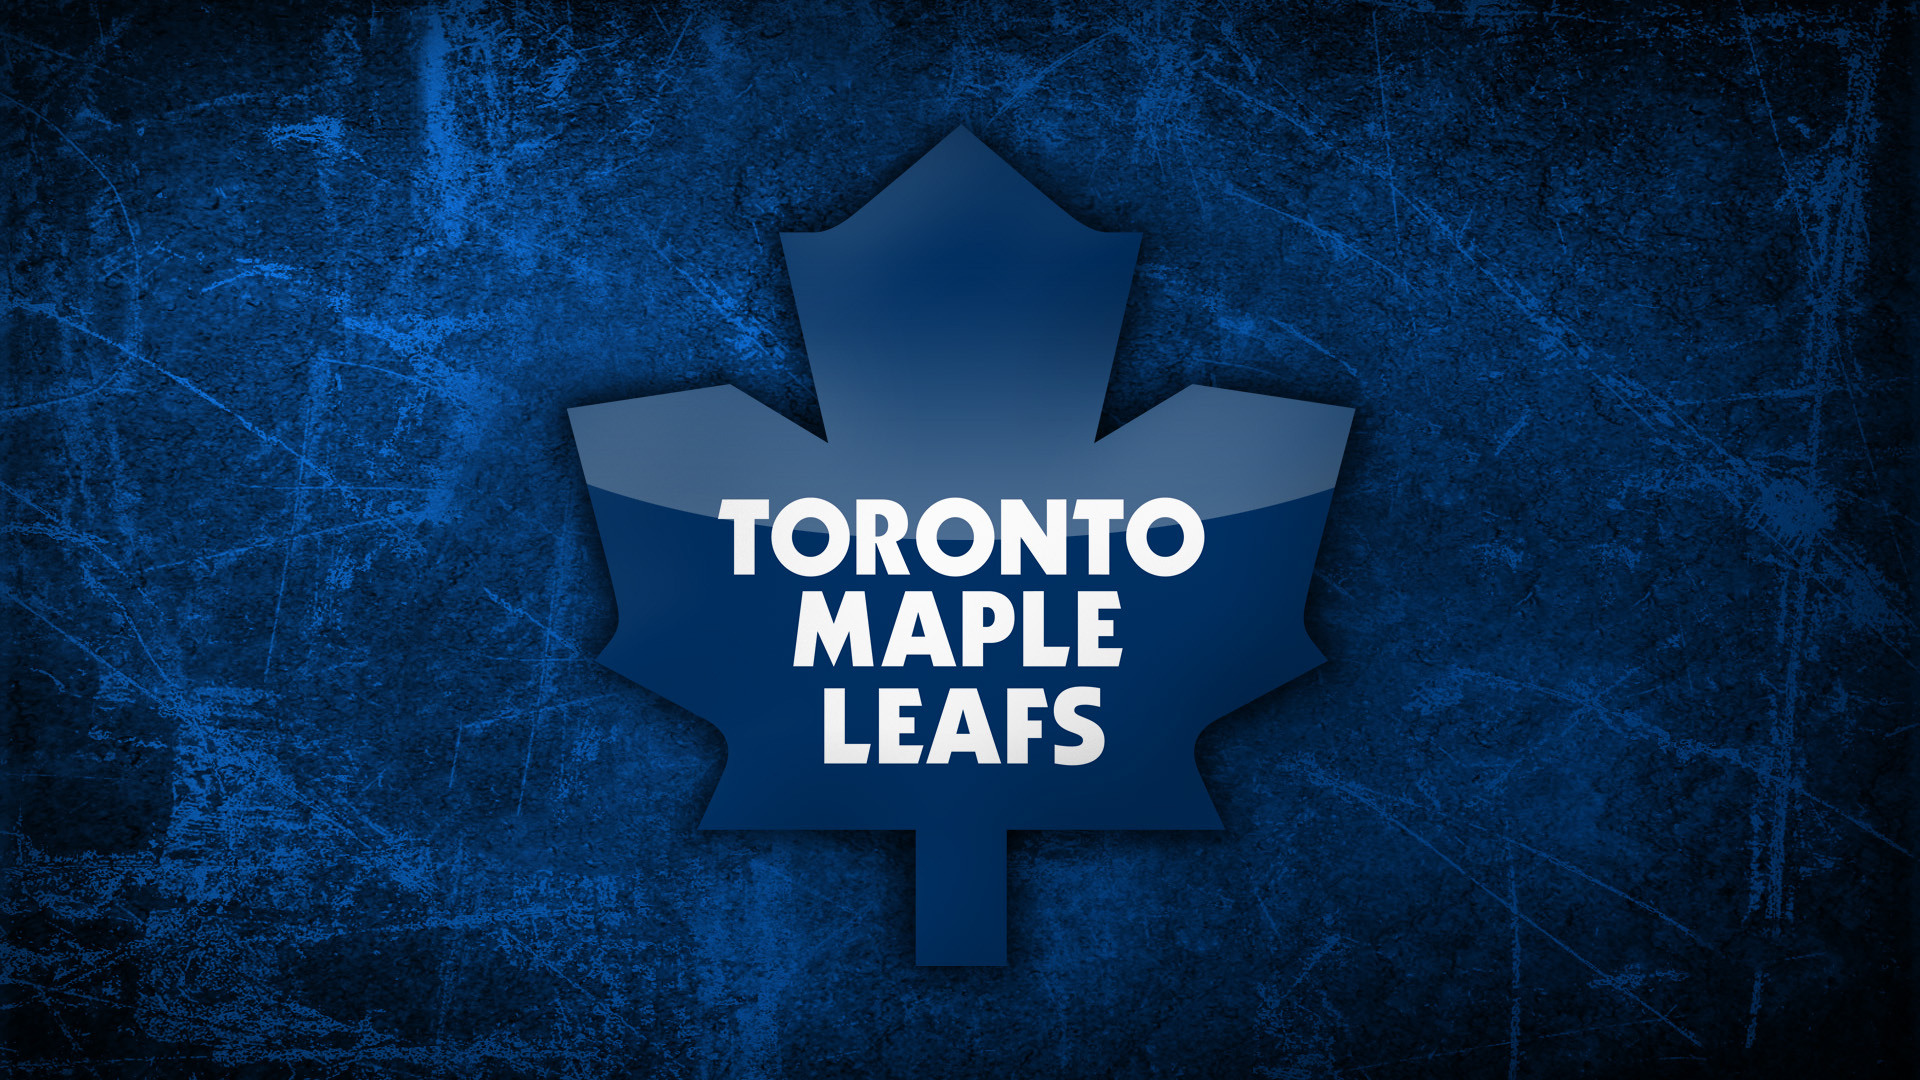 Toronto maple leafs 0 NHL Cool Wallpapers 1920 1200